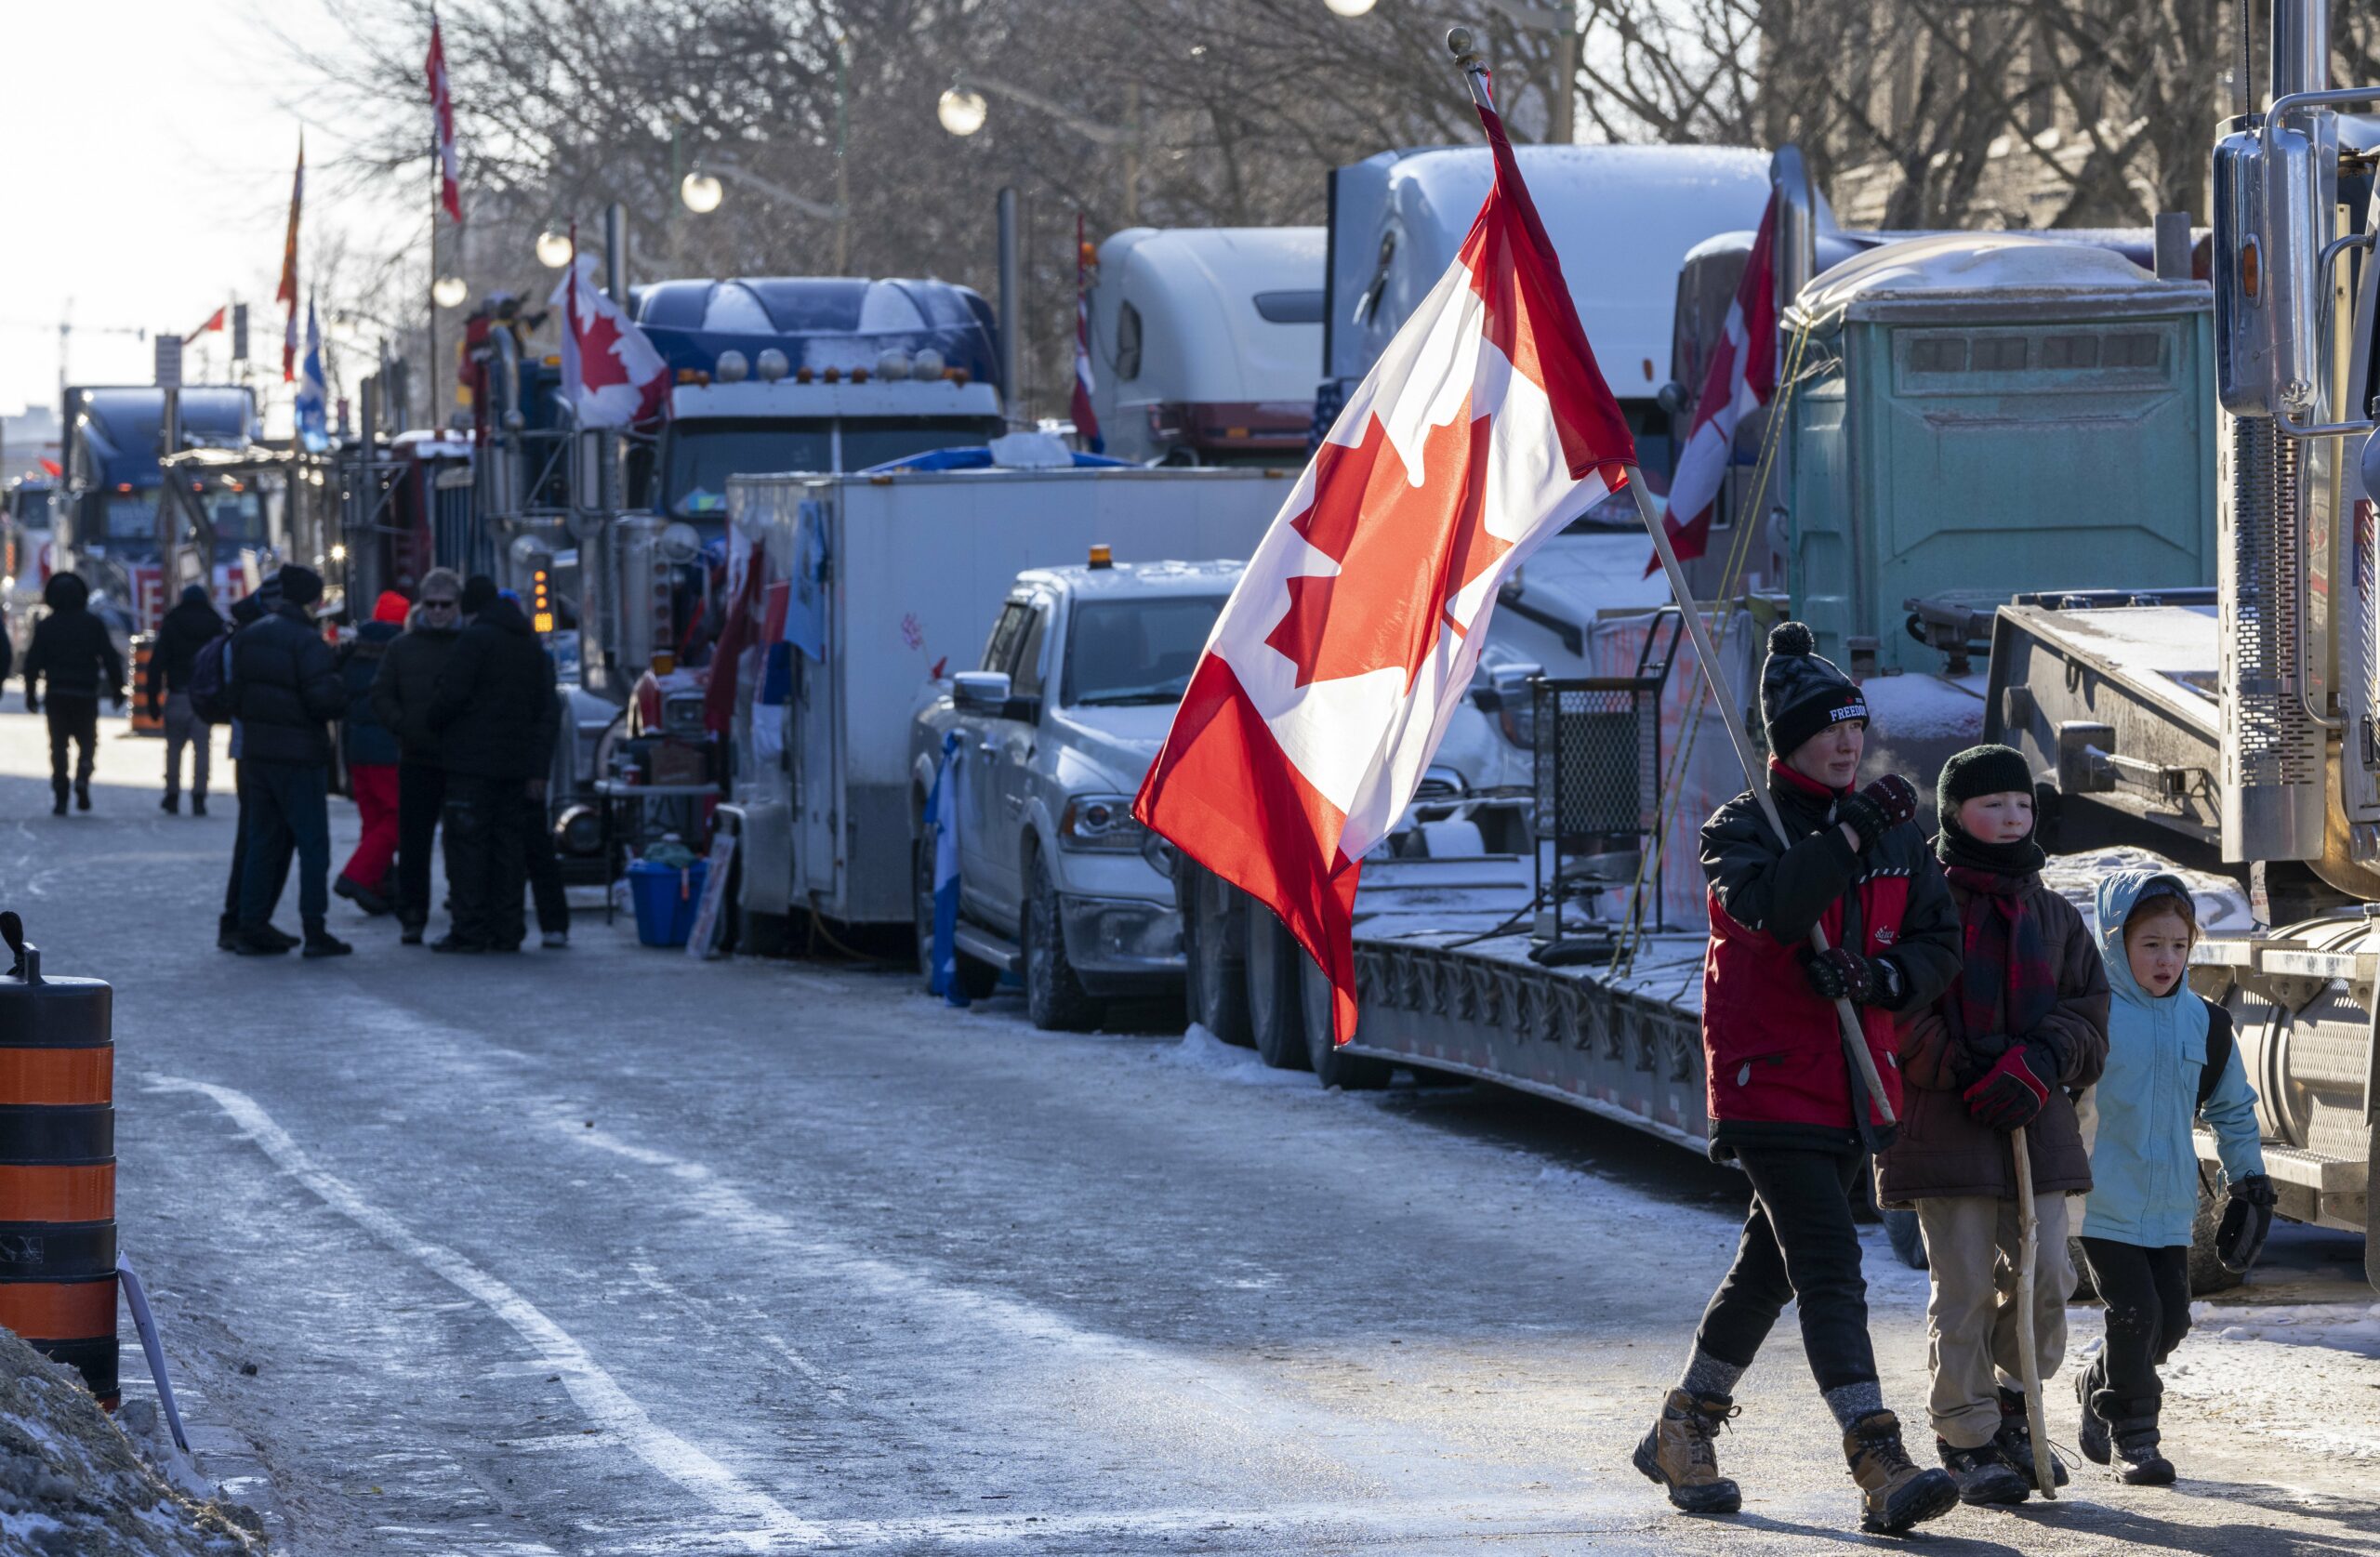 PC ridings donated more often than others to ‘Freedom Convoy’: analysis